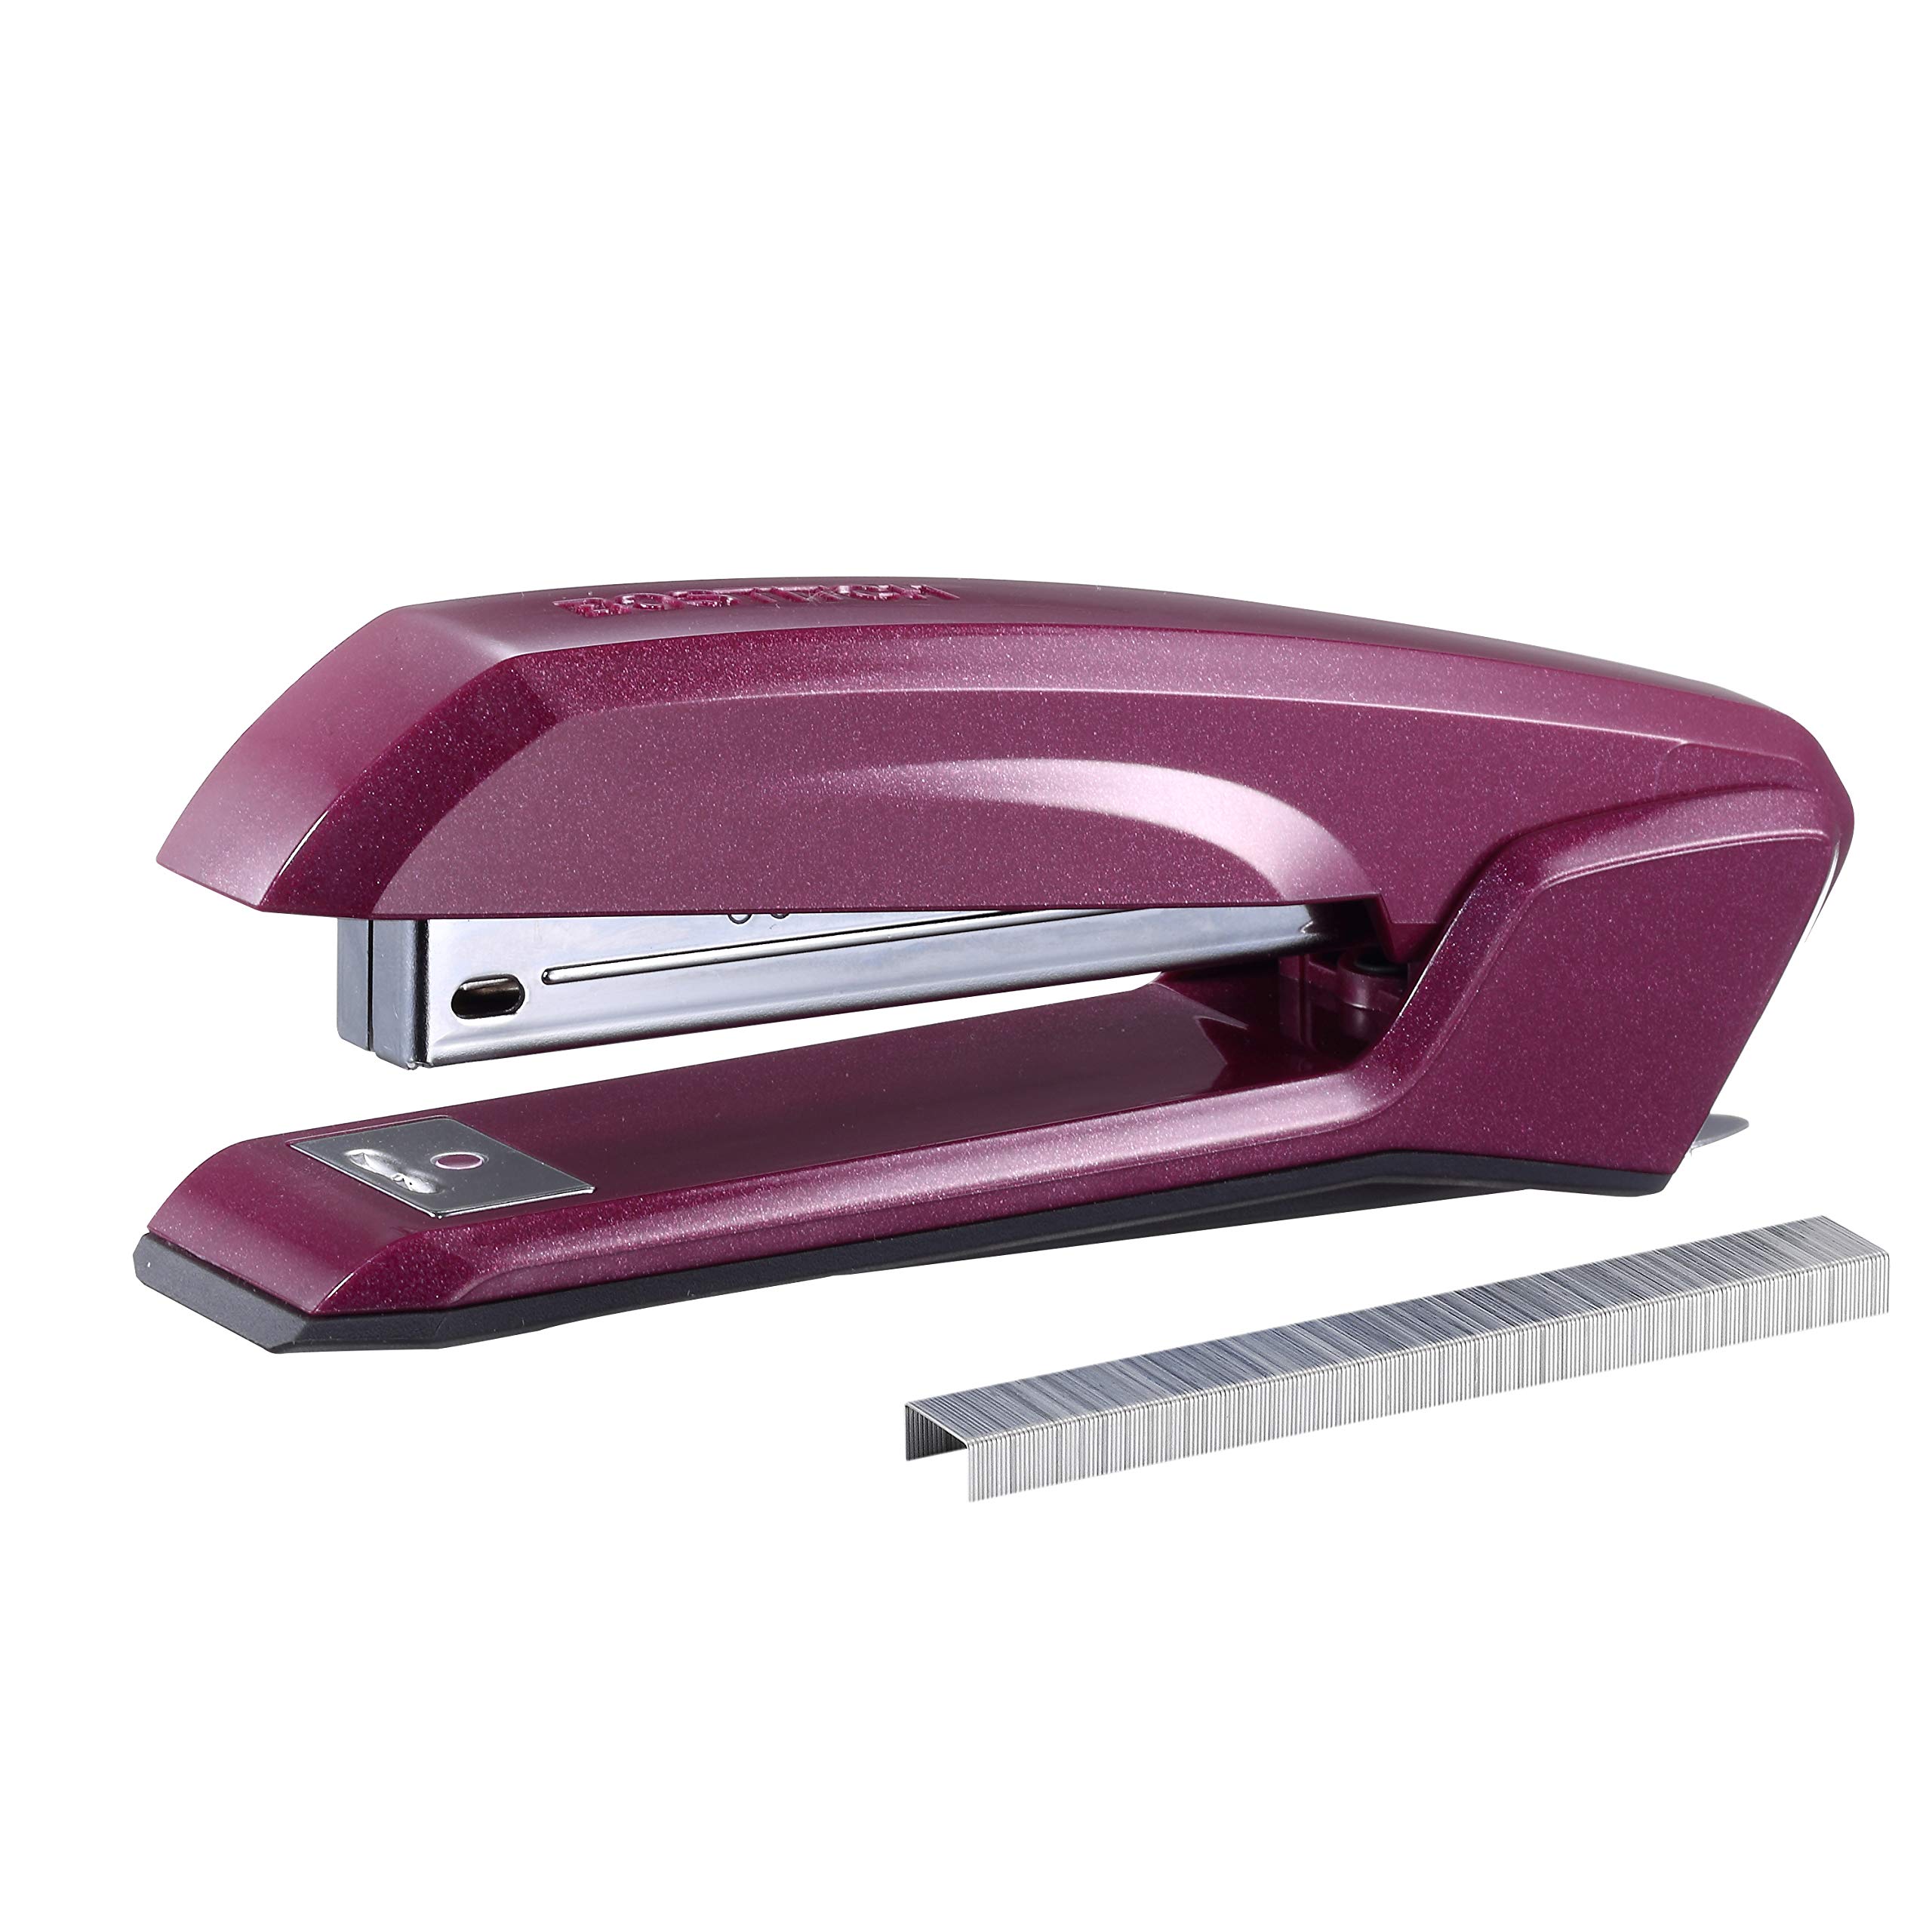 Book Cover Bostitch Office Ascend 3 in 1 Stapler, 20 Sheet Capacity, Integrated Remover & Staple Storage, 420 Staples Included, Lightweight, Magenta